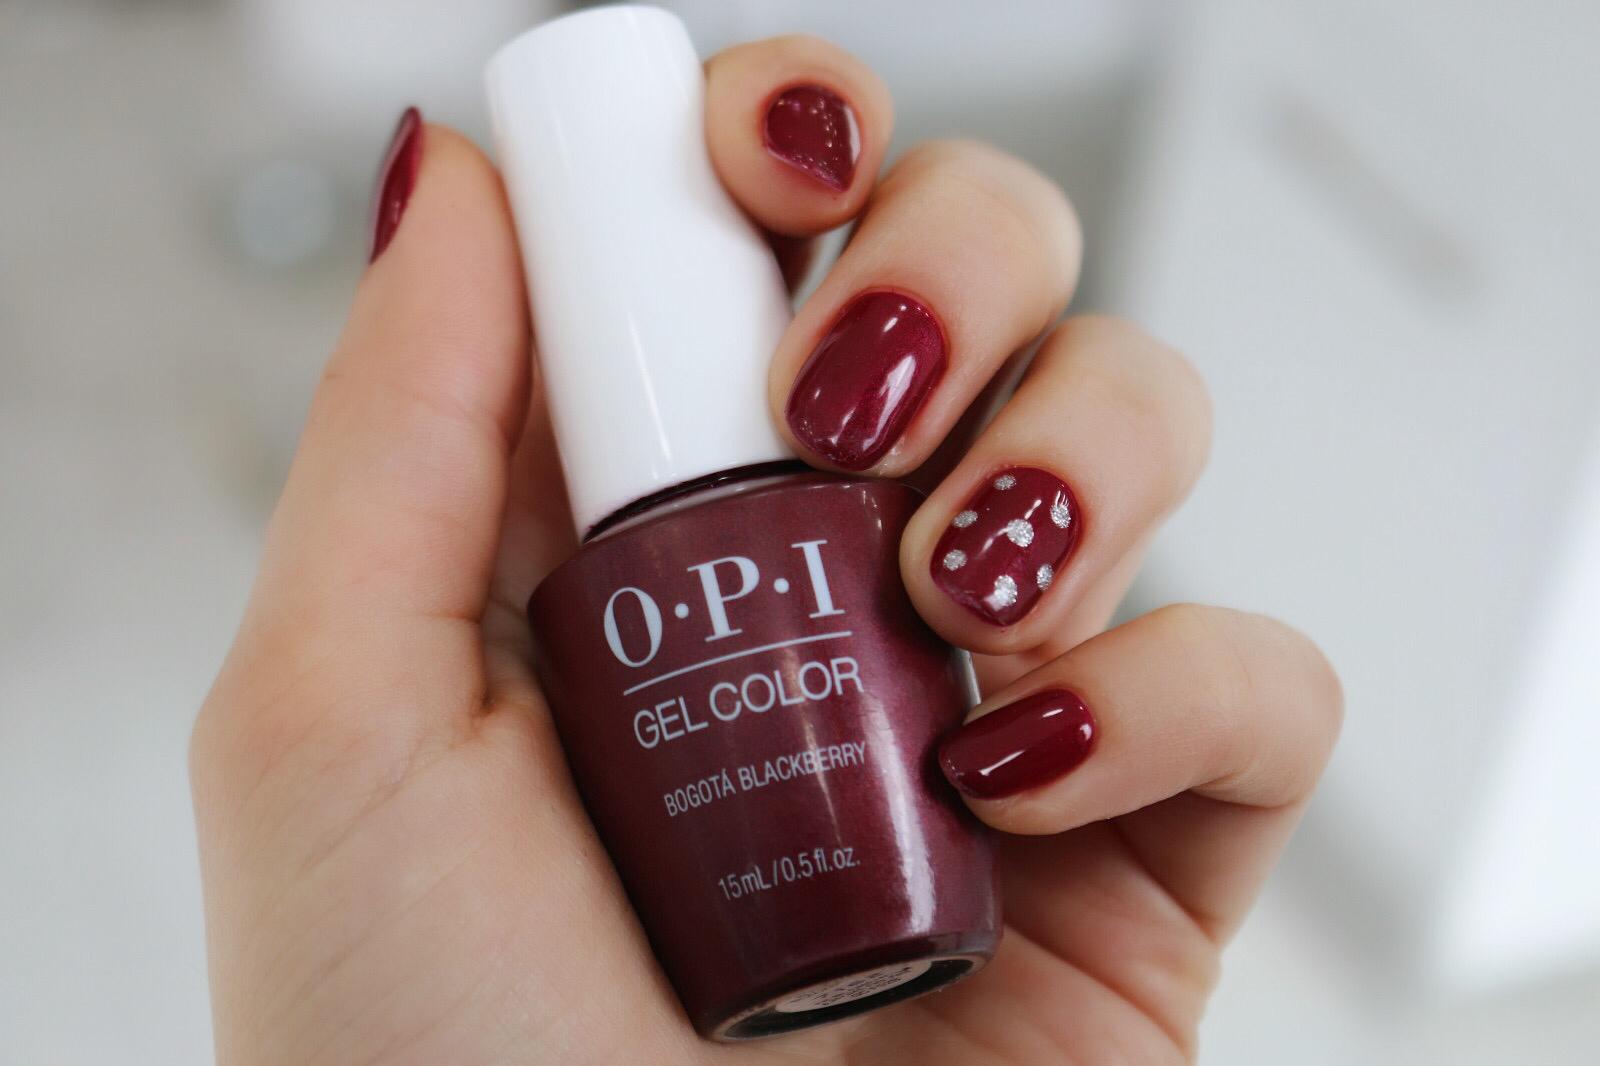 Dotty nails by Lashious Beauty using OPI GelColor 